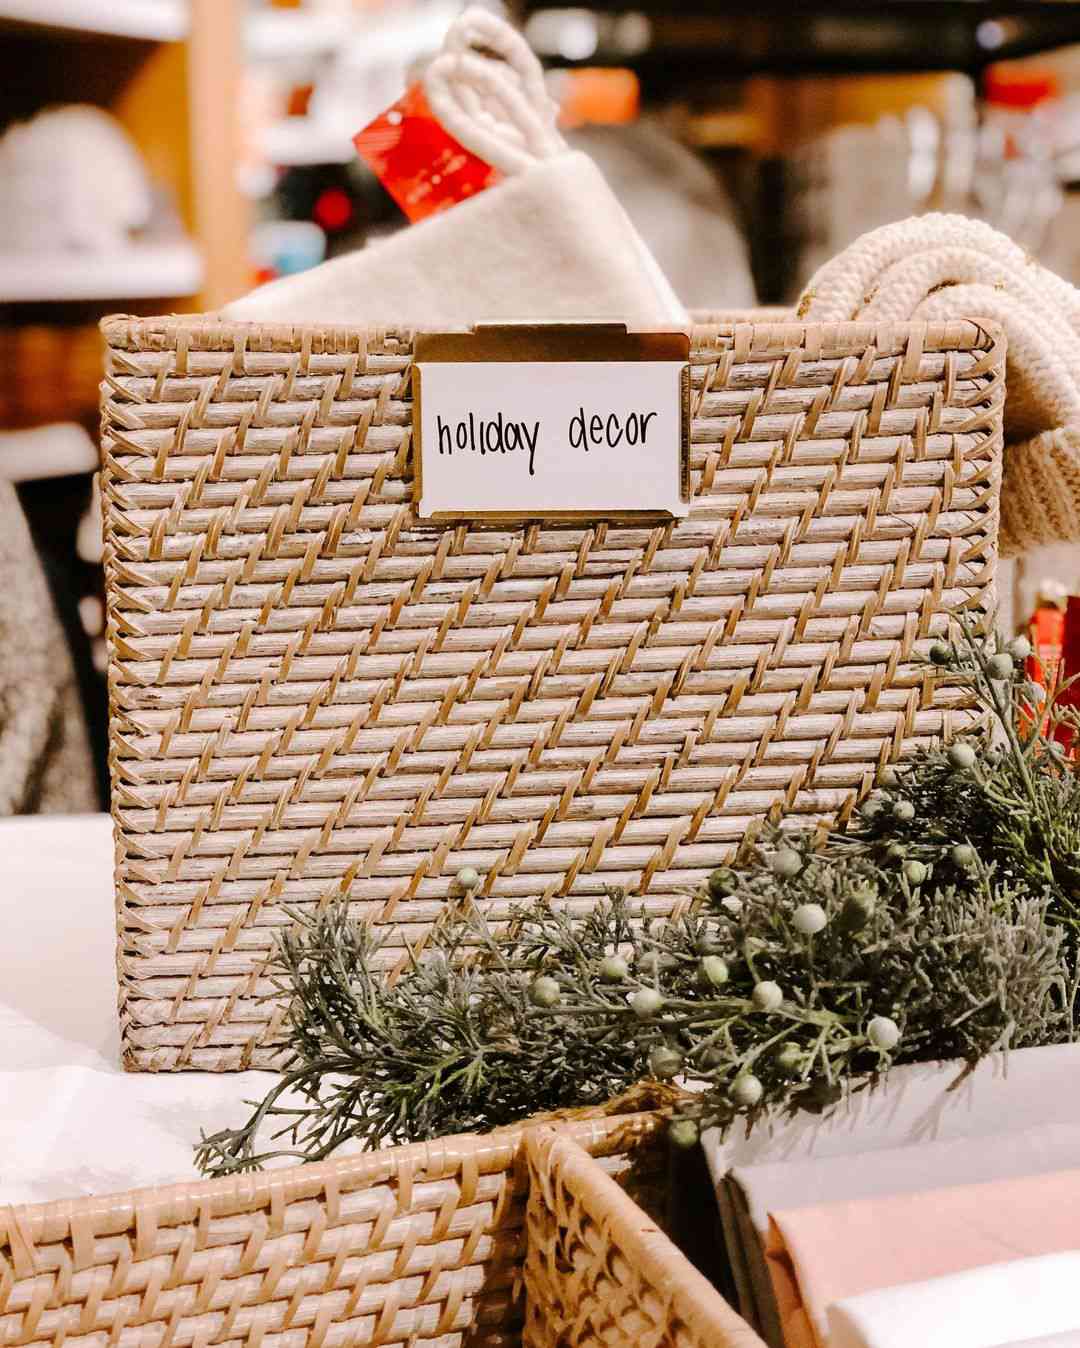 Storage cube used for holiday decor